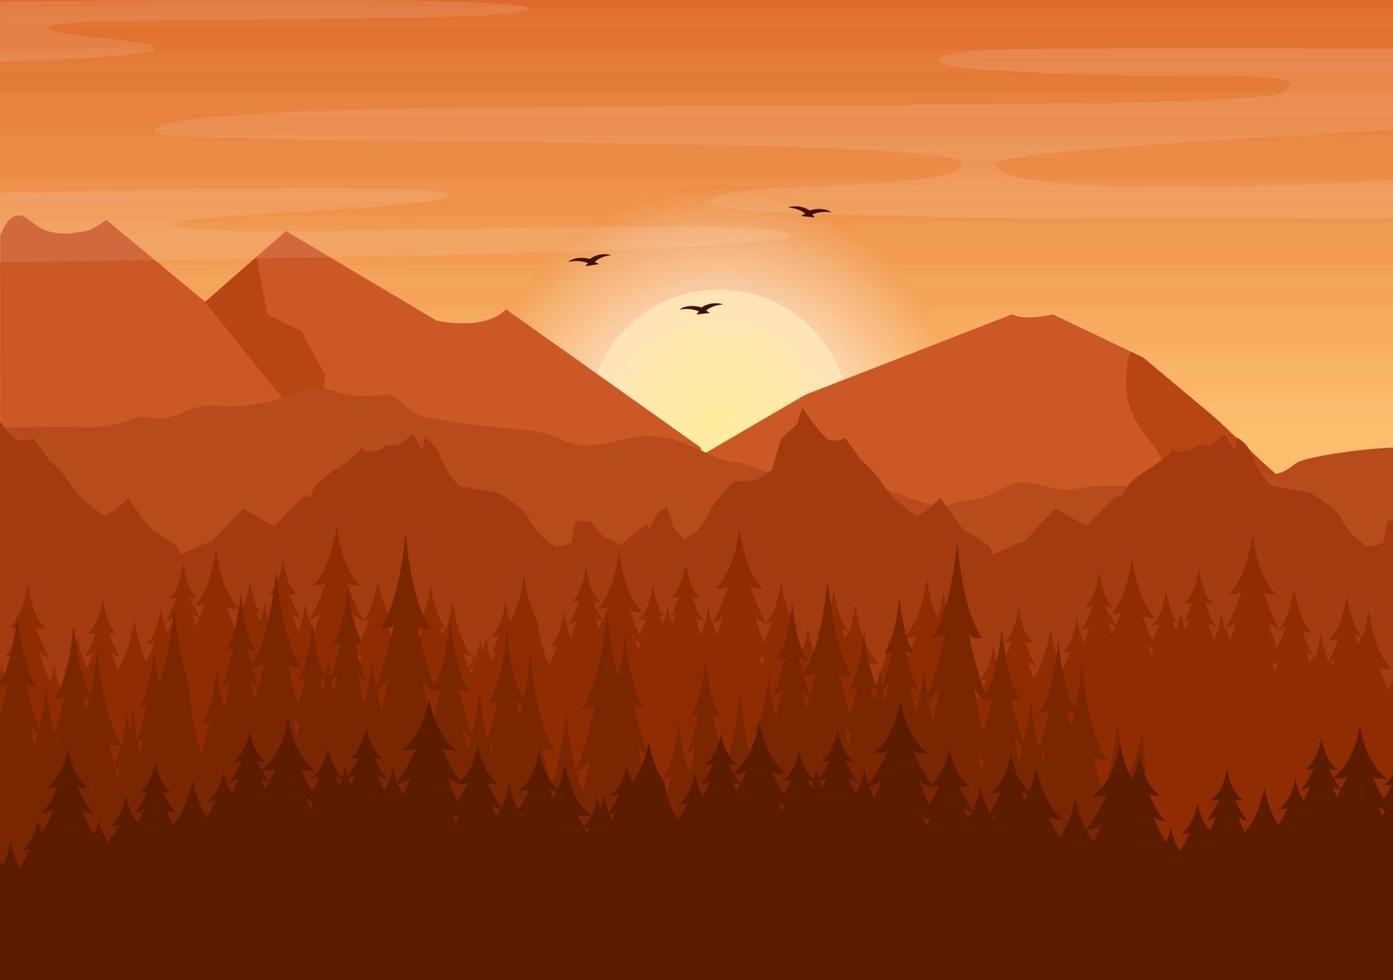 Sunset Landscape of Mountains, Hill, Wilderness, Sands, Lake and Valley in Flat Wild Nature for Poster, Banner or Background Illustration vector